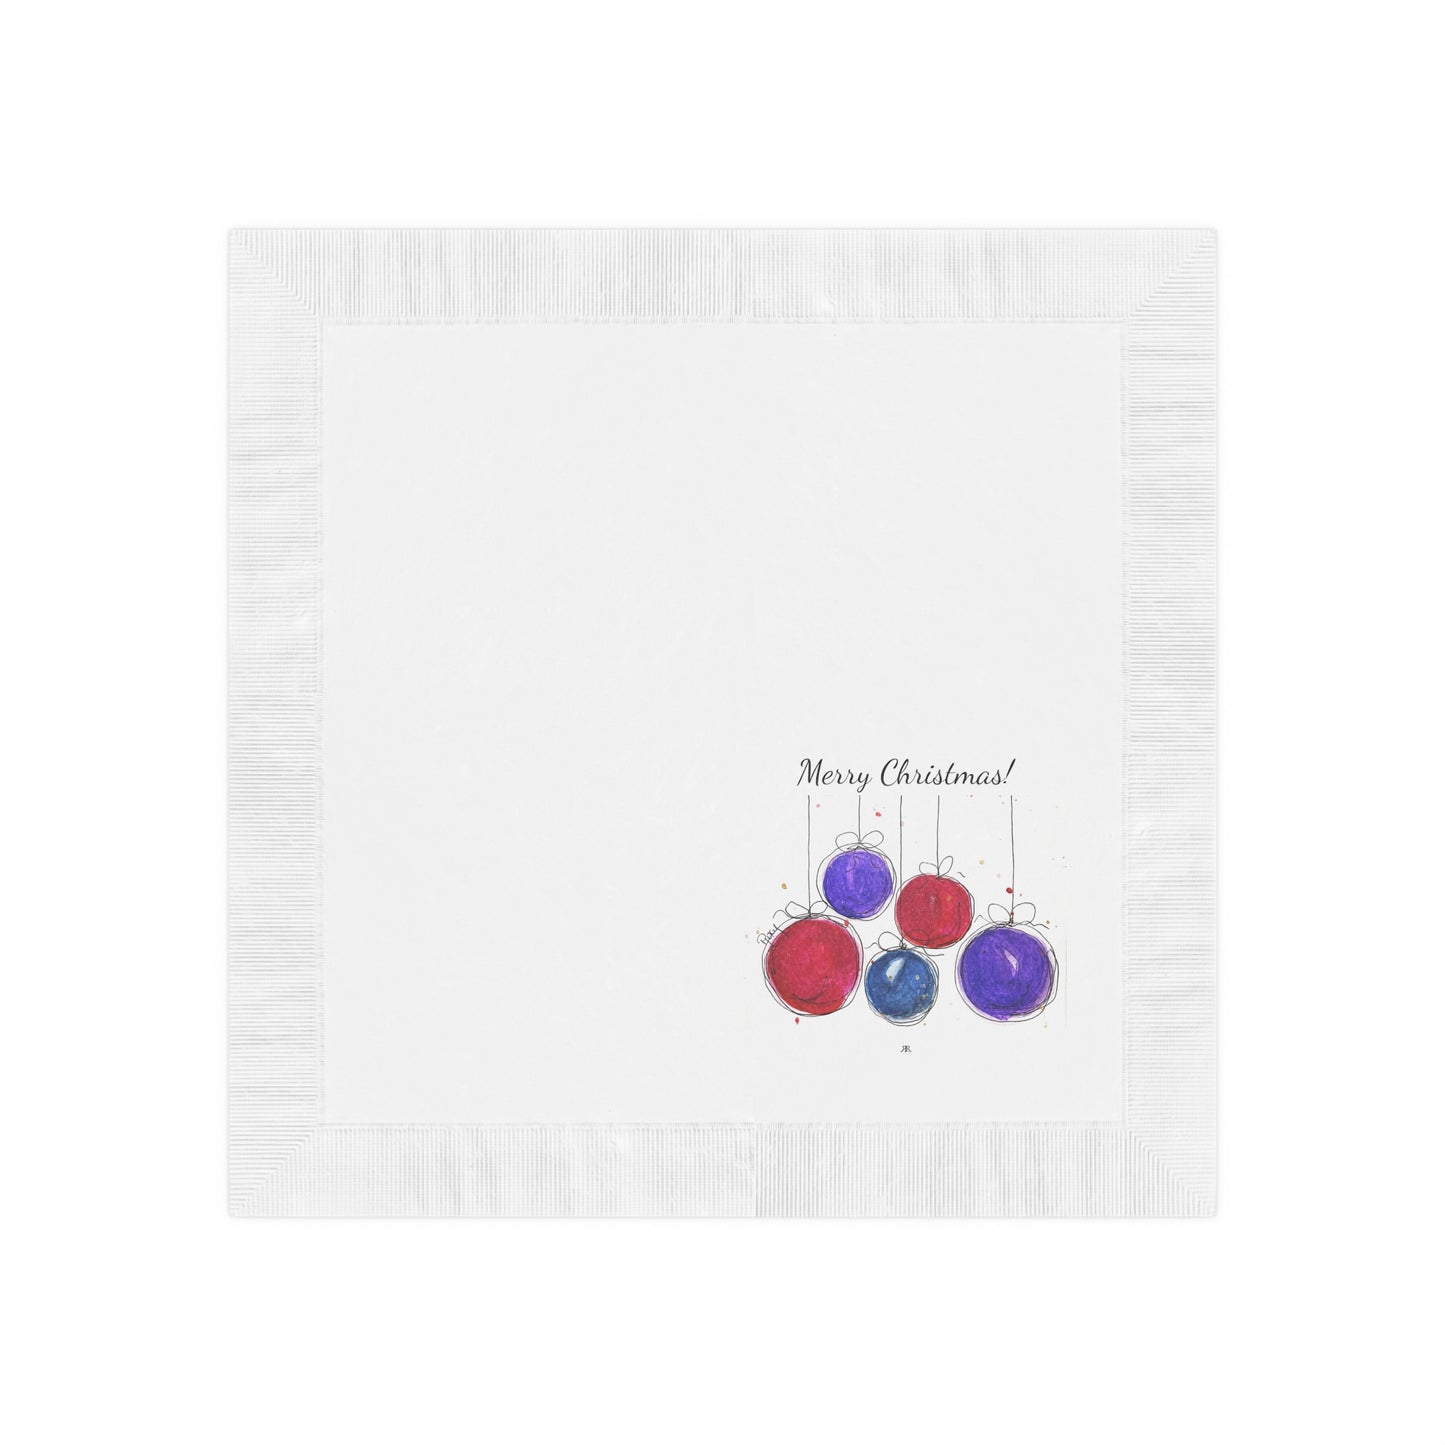 Merry Christmas! Baubles-White Coined Napkins